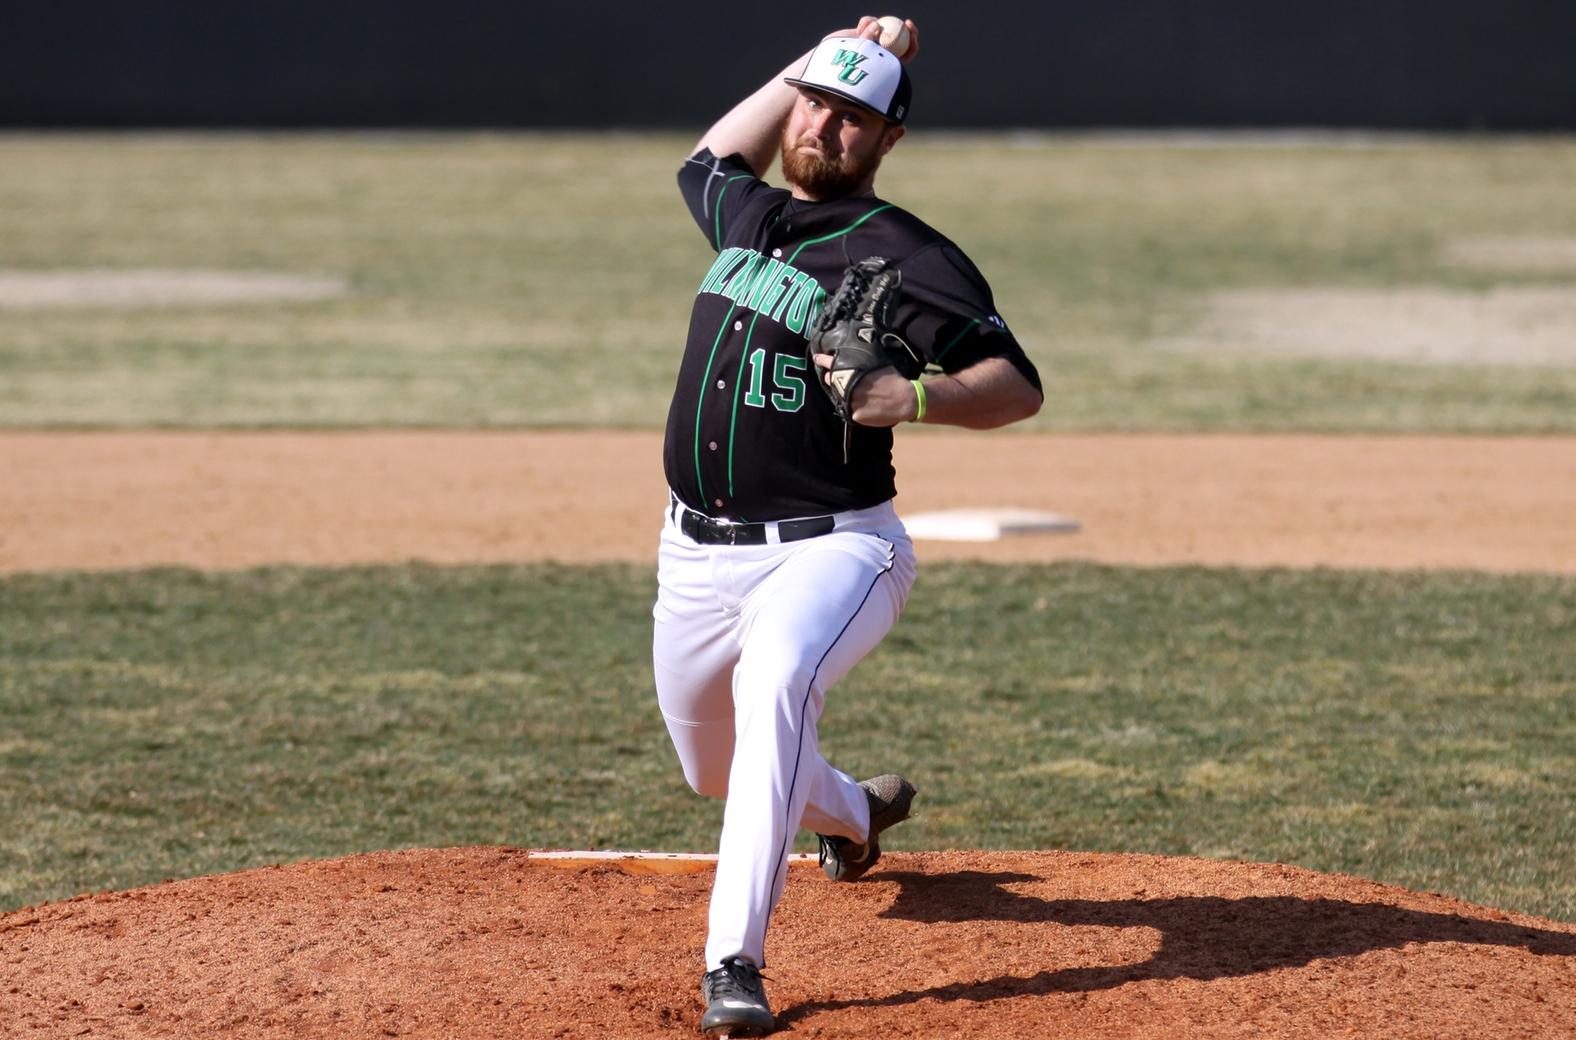 Copyright 2019; Wilmington University. All rights reserved. File photo of Sean Deely who struck out 11 in game one against USciences on Friday. Photo by Dan Lauletta. March 16, 2019 vs. Bridgeport.